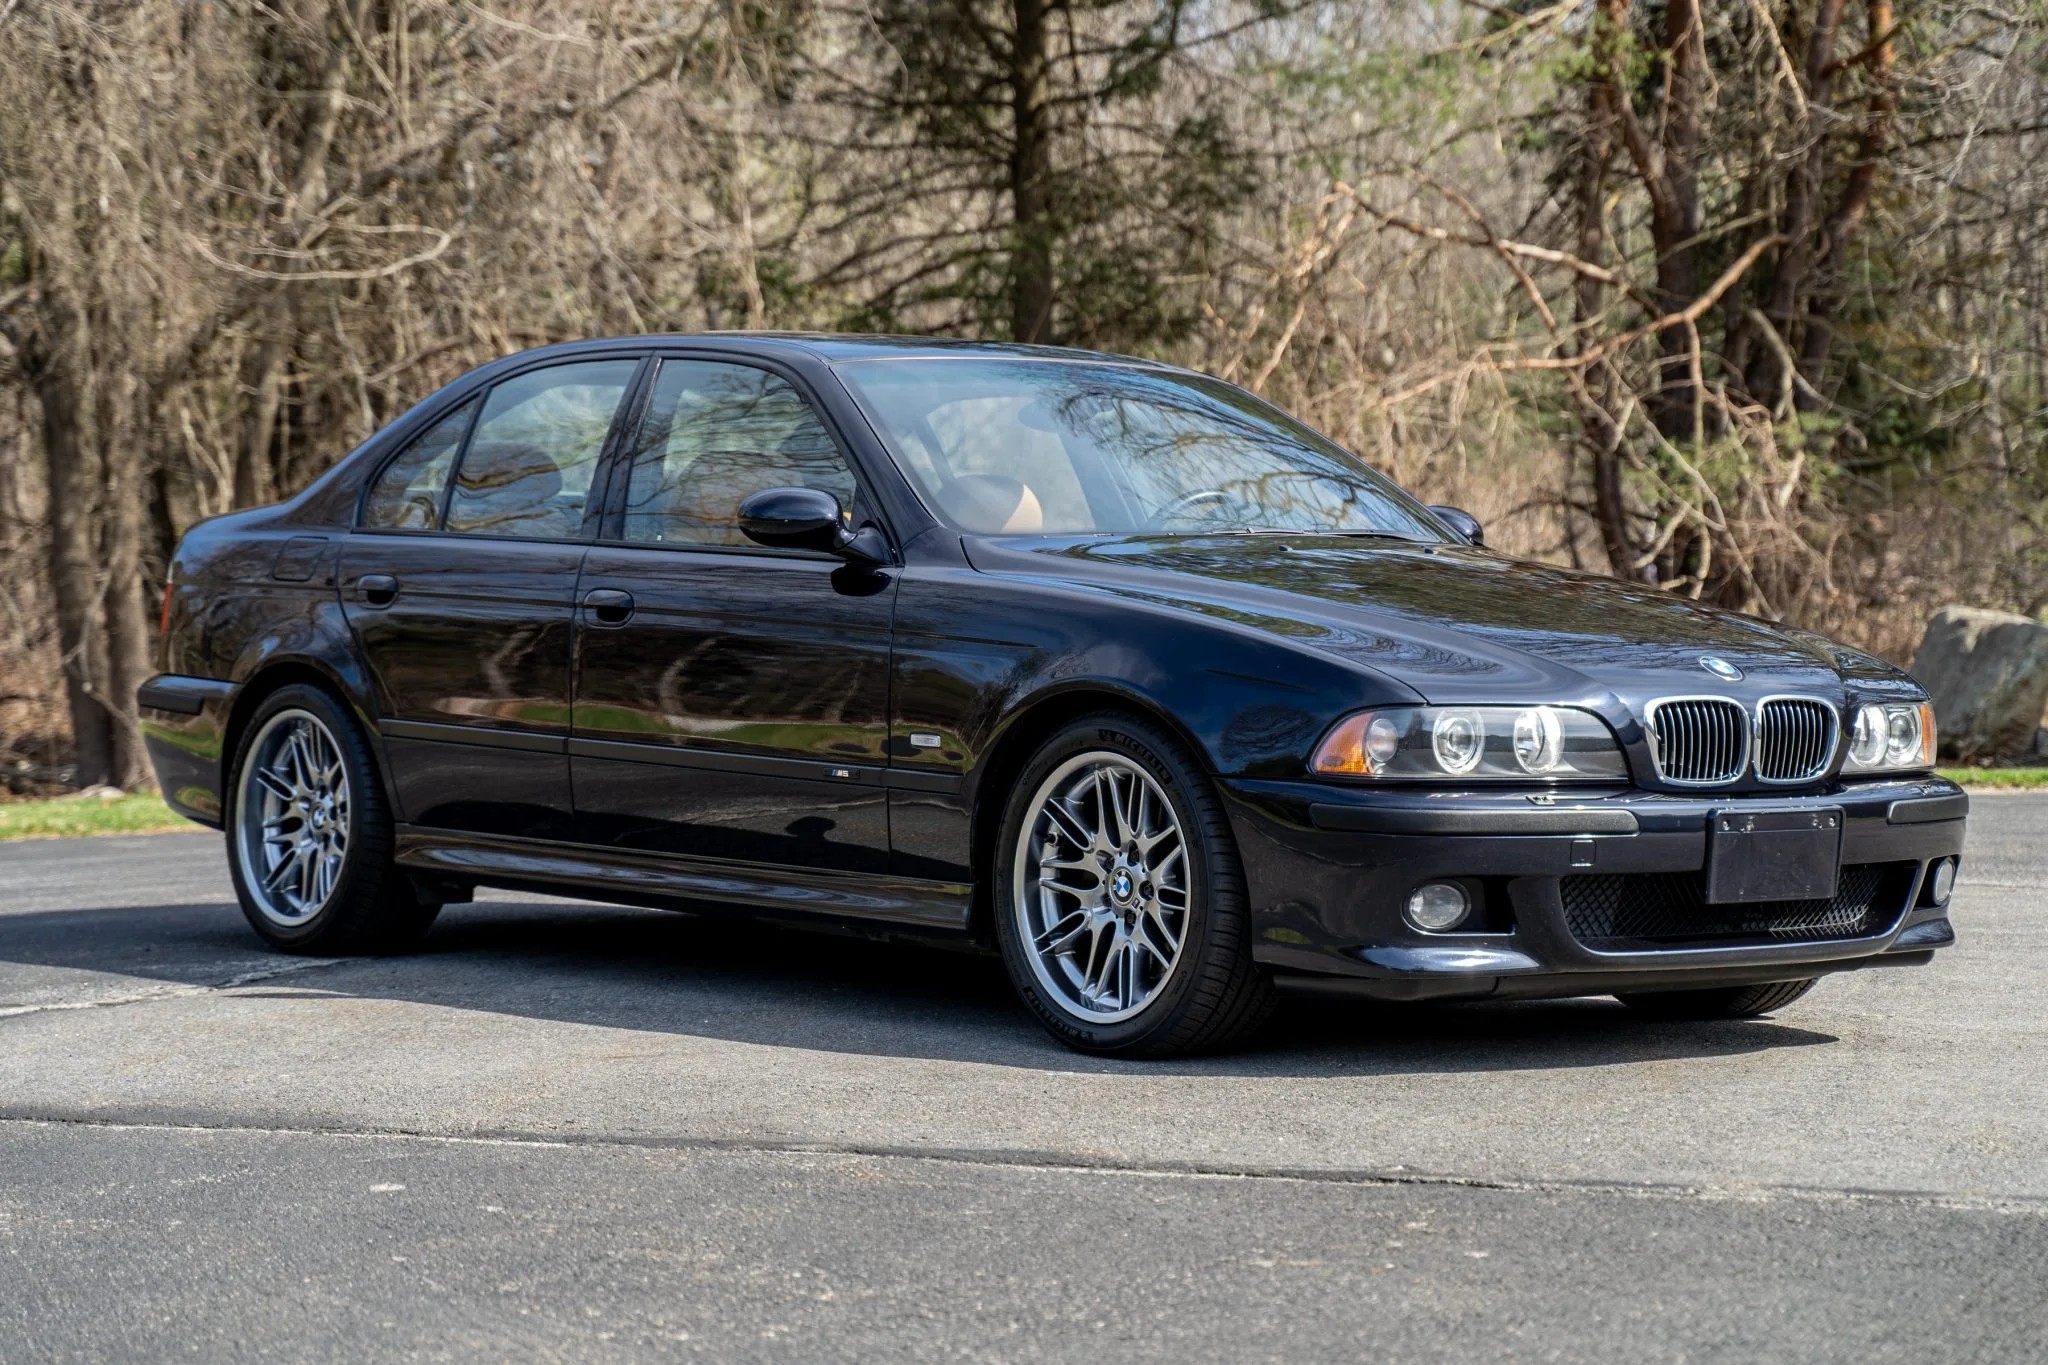 https://s1.cdn.autoevolution.com/images/news/this-2001-low-mile-bmw-e39-m5-is-the-ultimate-go-fast-sedan-214252_1.jpg